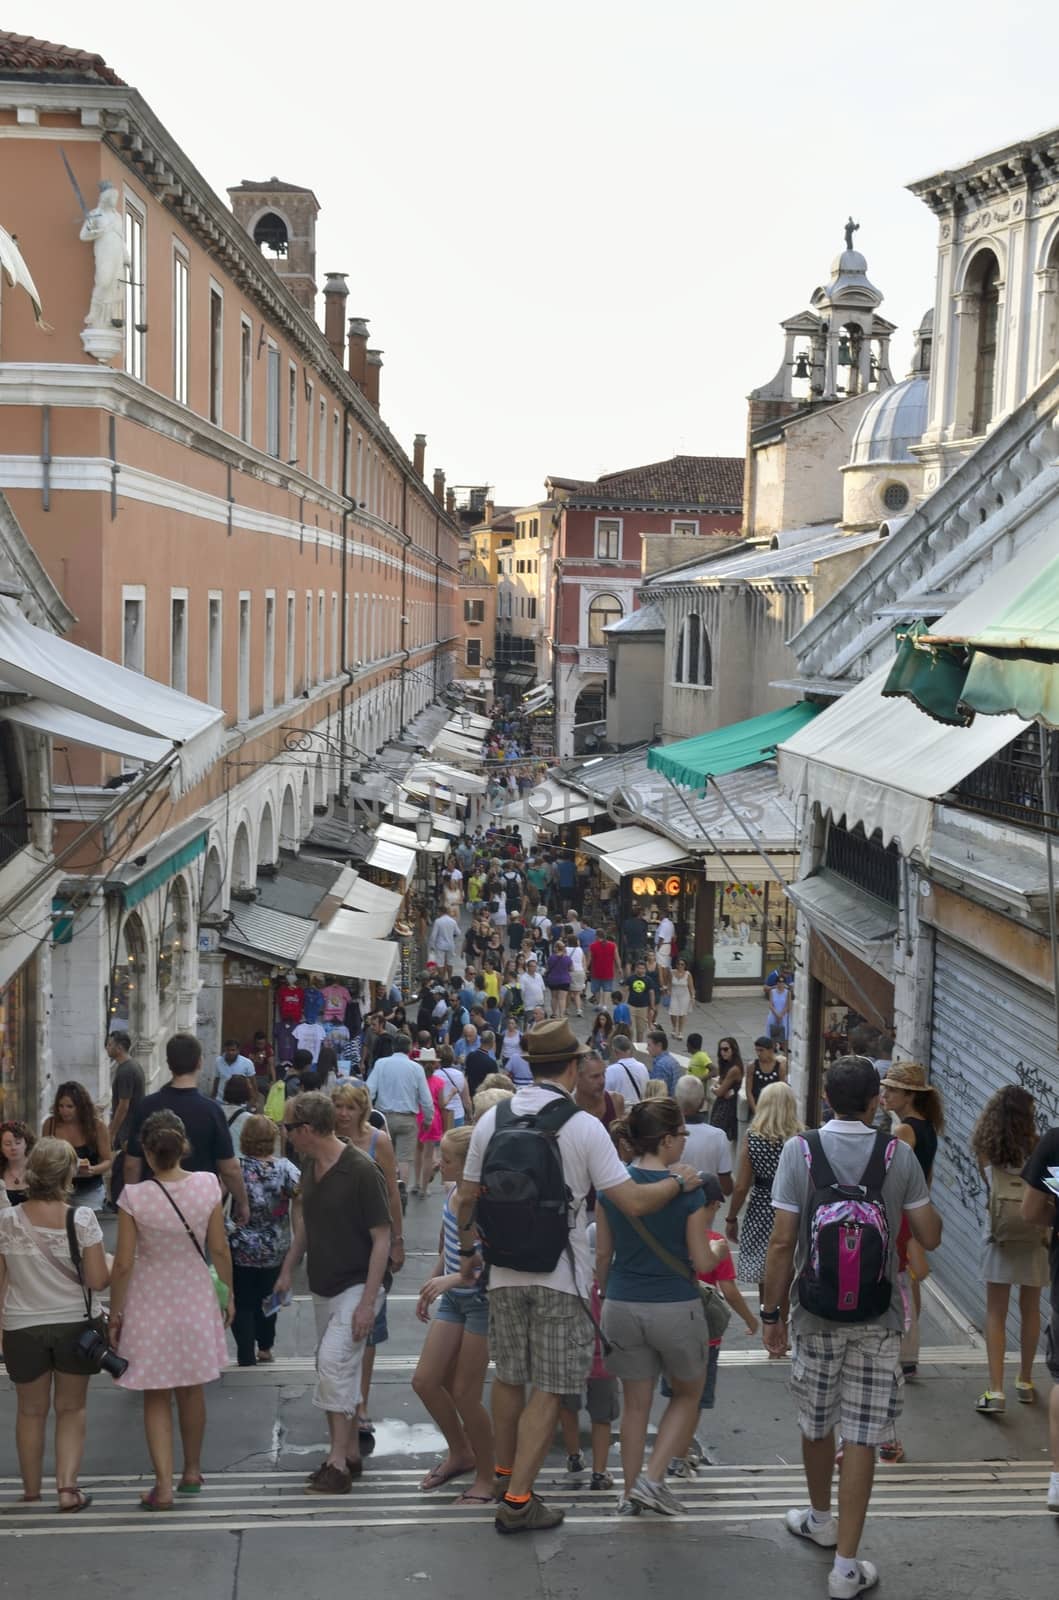 Lots of tourists at  the Rialto market in Venice, Italy.